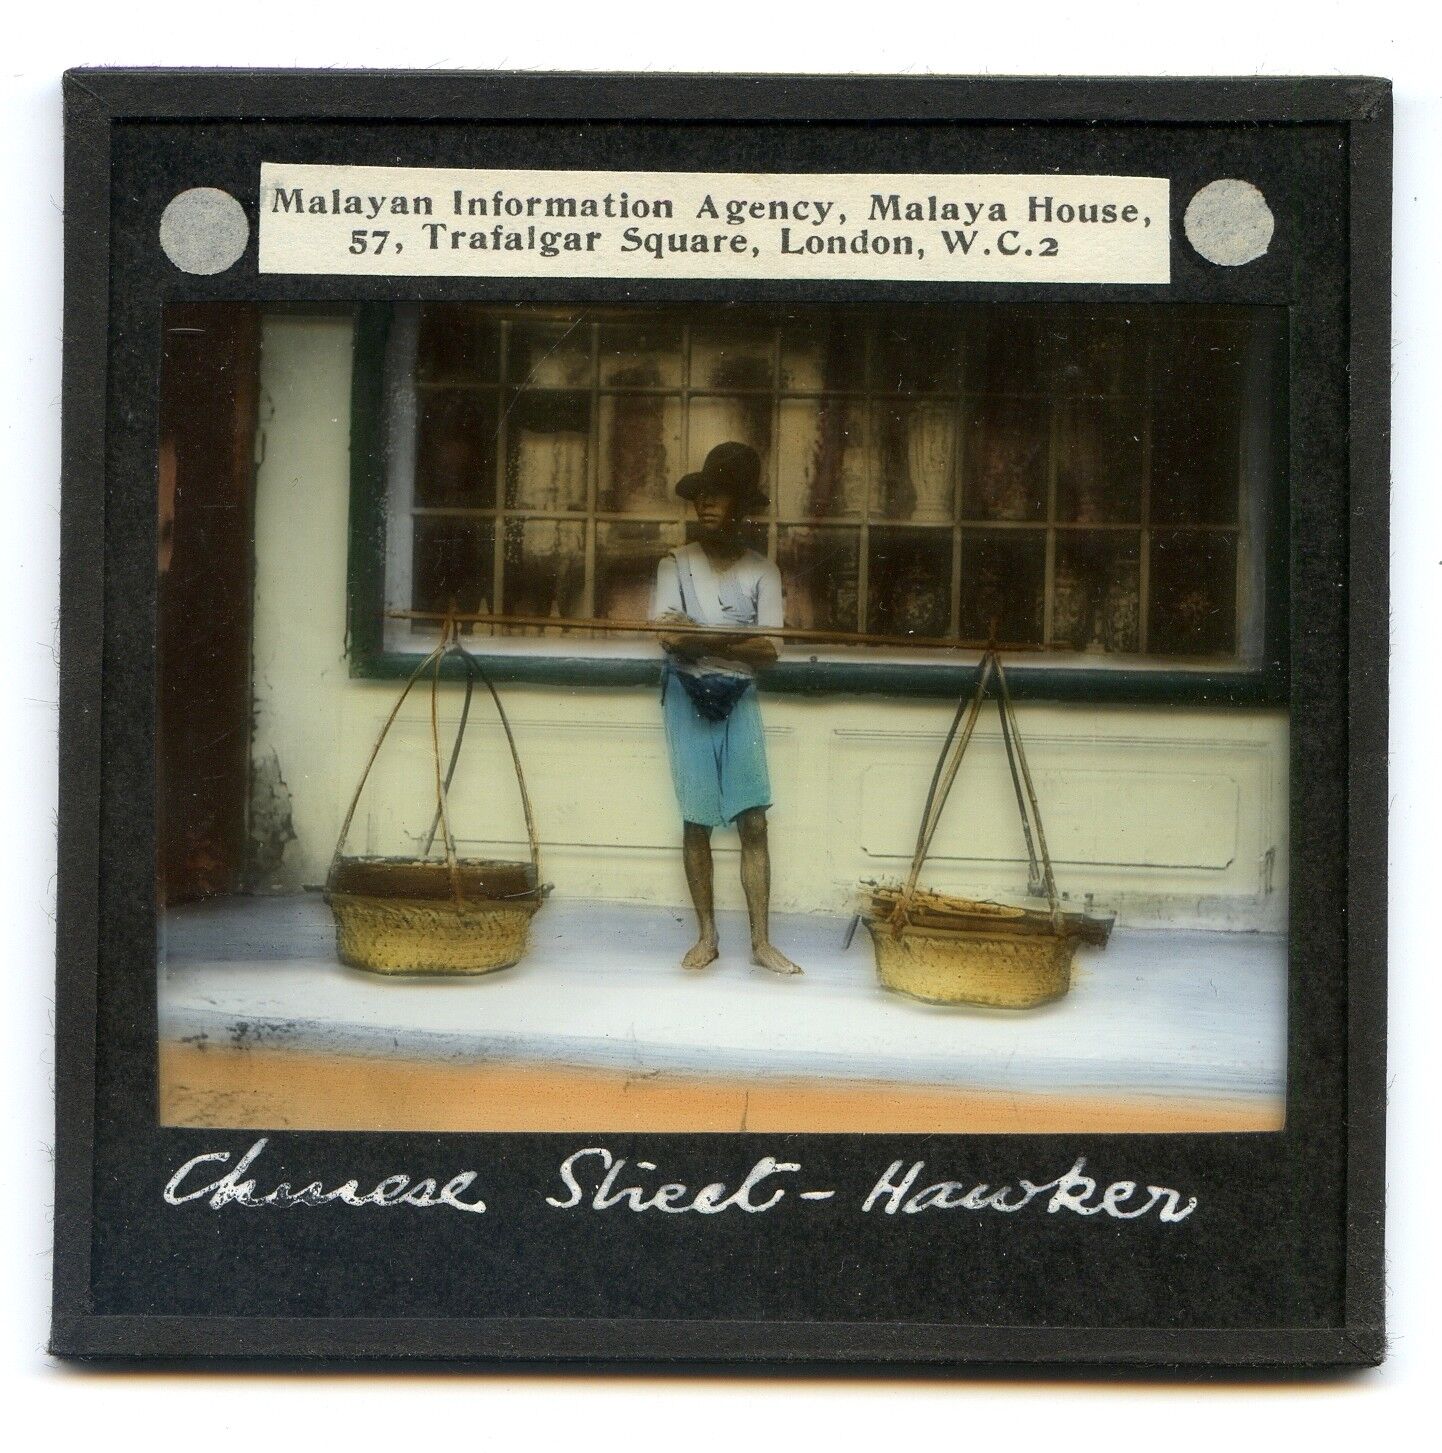 Chinese Street Hawker, Antique Singapore Malaysia Glass Slide